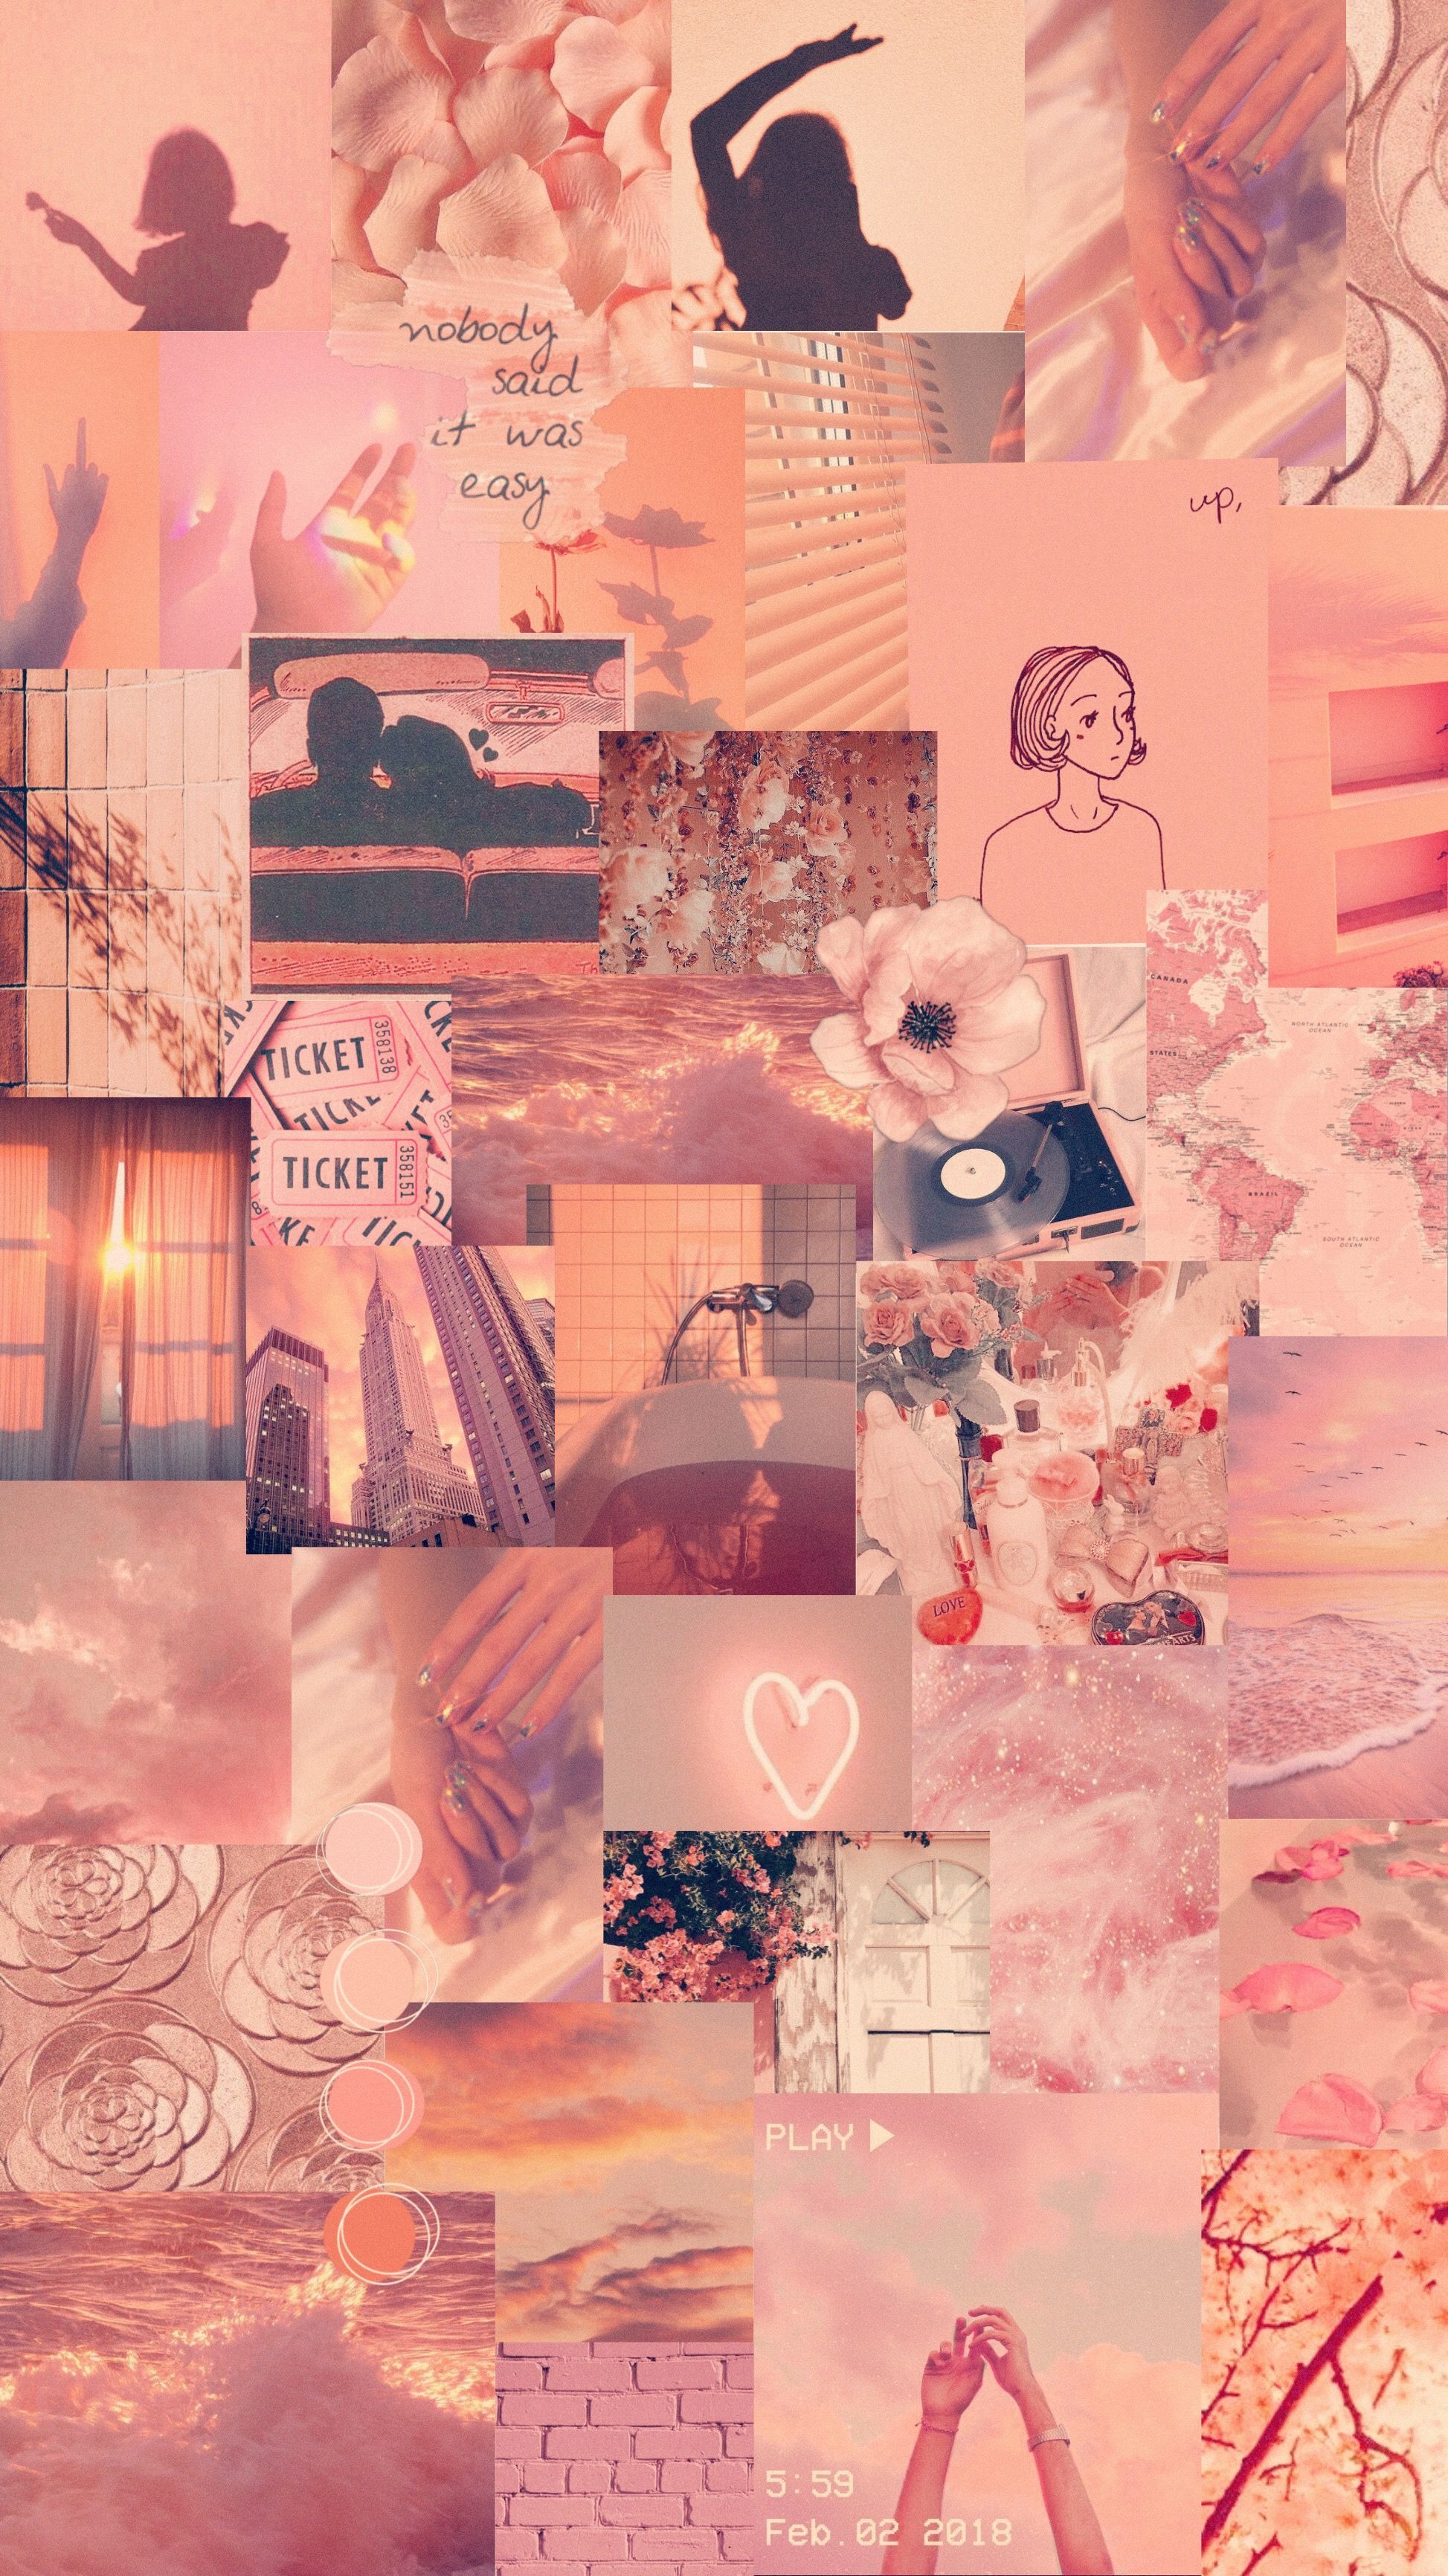 peach #retro #pink #collage #aesthetic #rosegold #travel #flower. iPhone wallpaper sky, Peach wallpaper, Travel collage